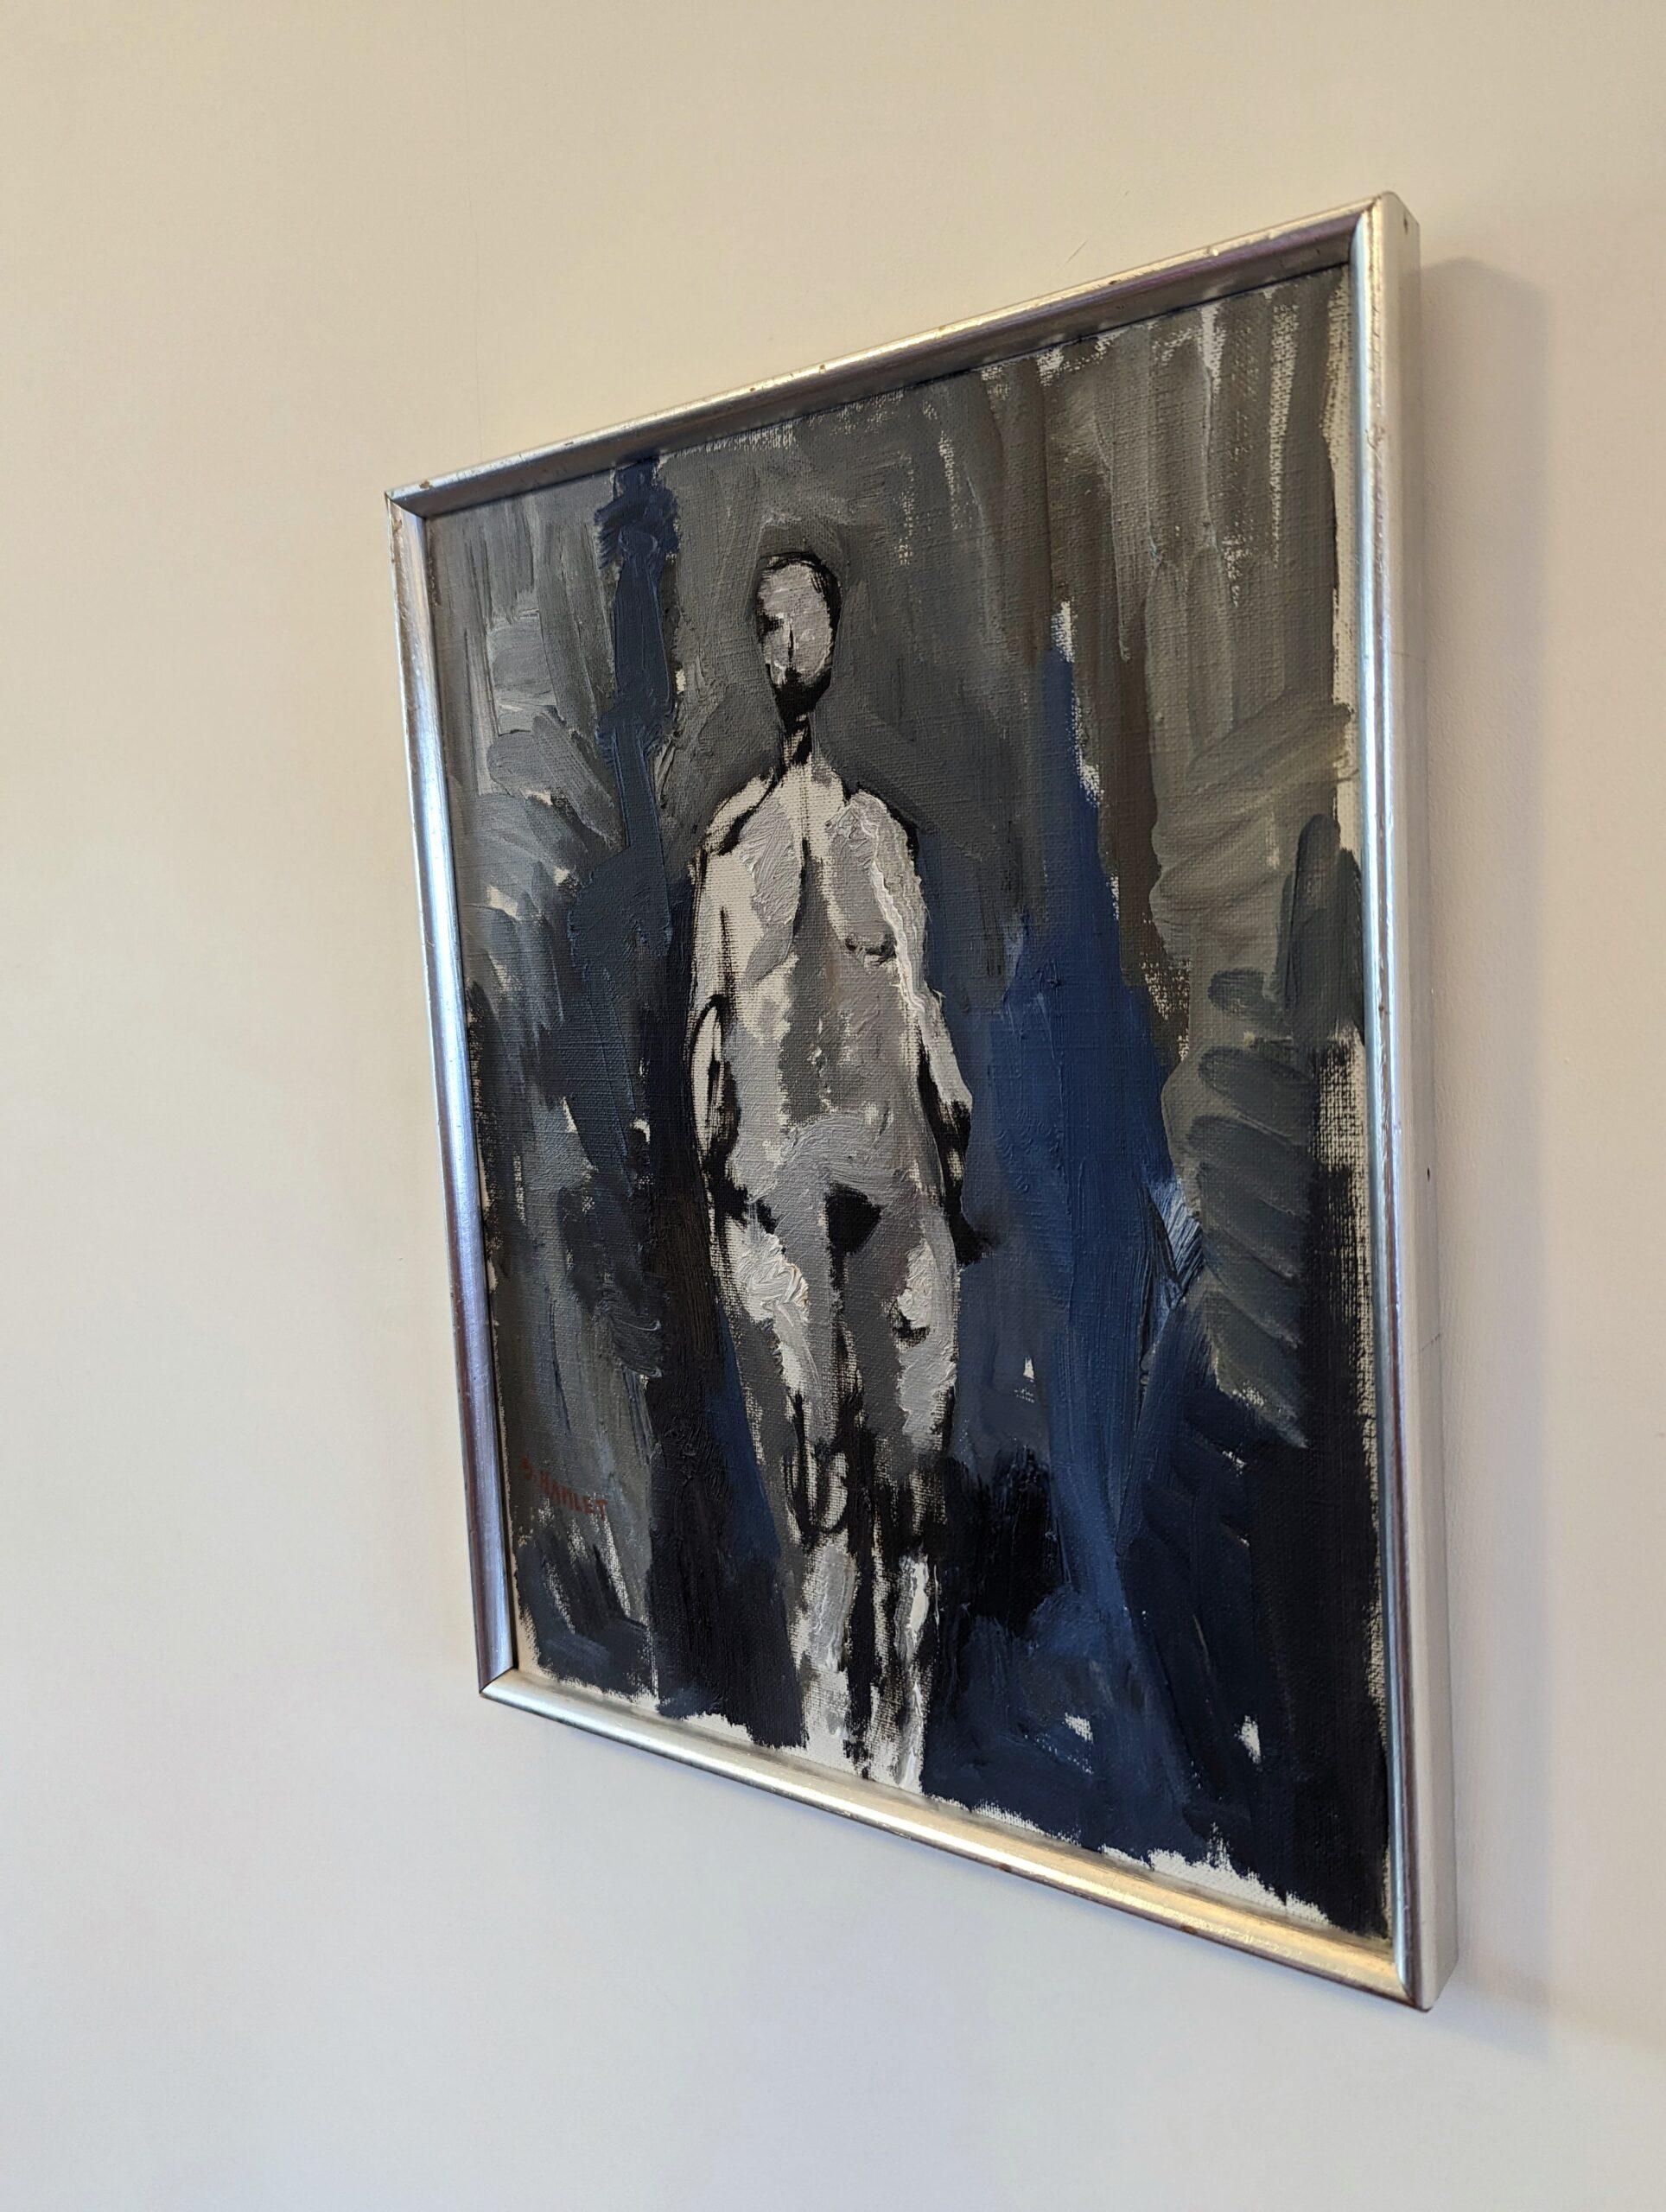 IN THE SHADOWS
Size: 37 x 29 cm (including frame)
Oil on canvas

An emotive and visually captivating abstract figurative painting, executed in oil onto canvas and dated 1973.

Small yet impactful, a standing abstracted figure punctuates the center